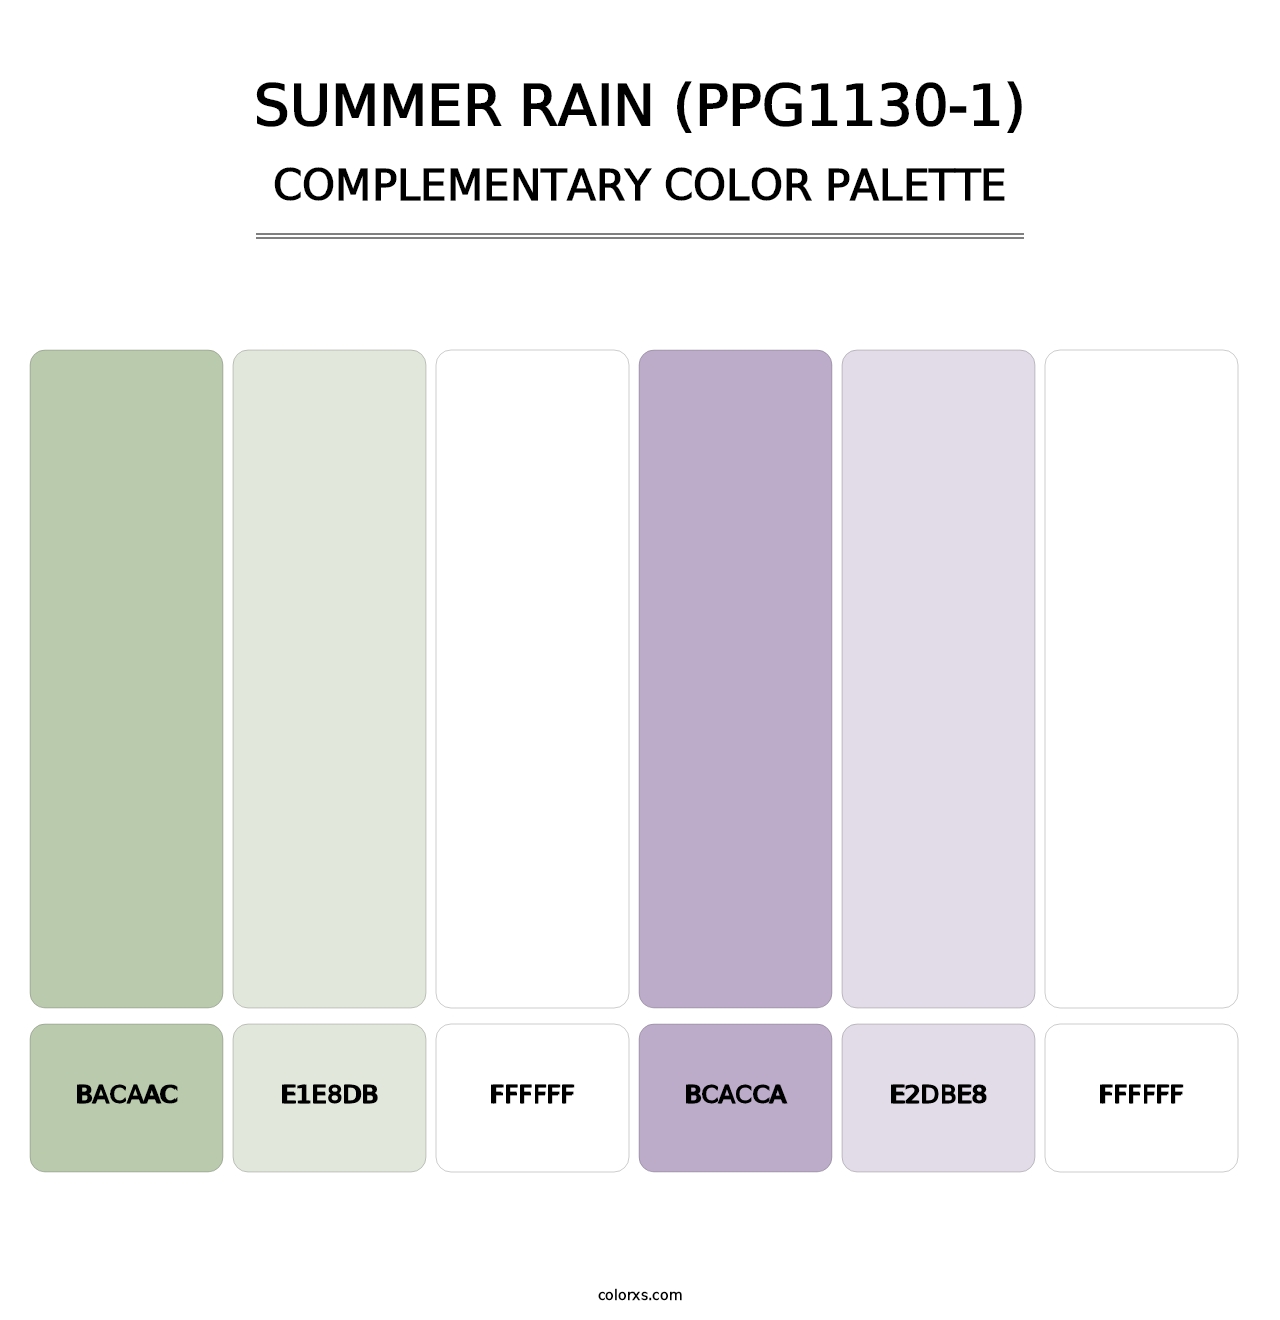 Summer Rain (PPG1130-1) - Complementary Color Palette